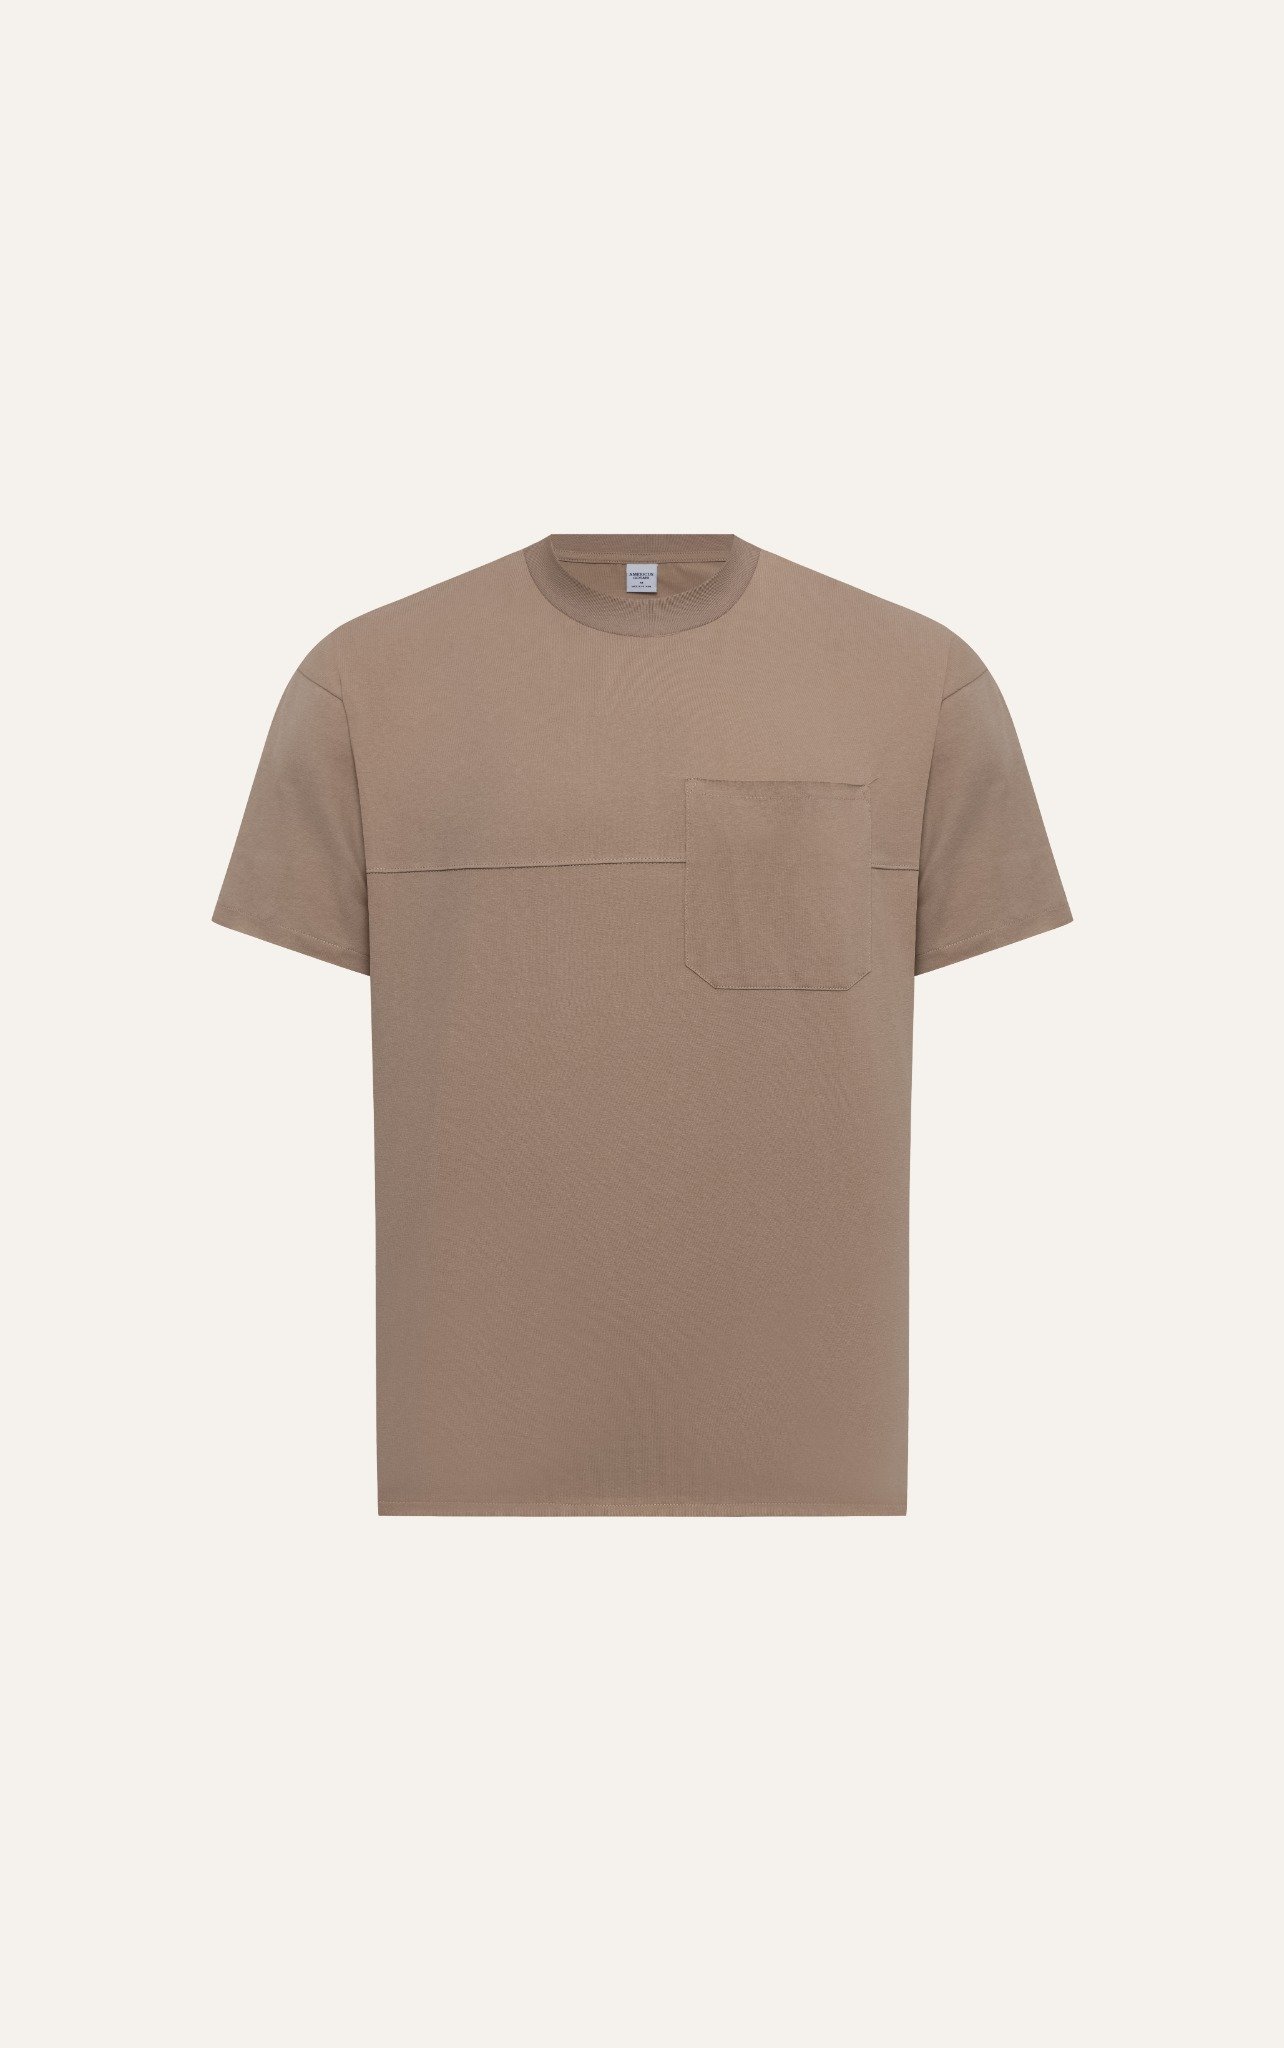 AG681 FACTORY OVERSIZE T-SHIRT WITH CHEST POCKET - BROWN